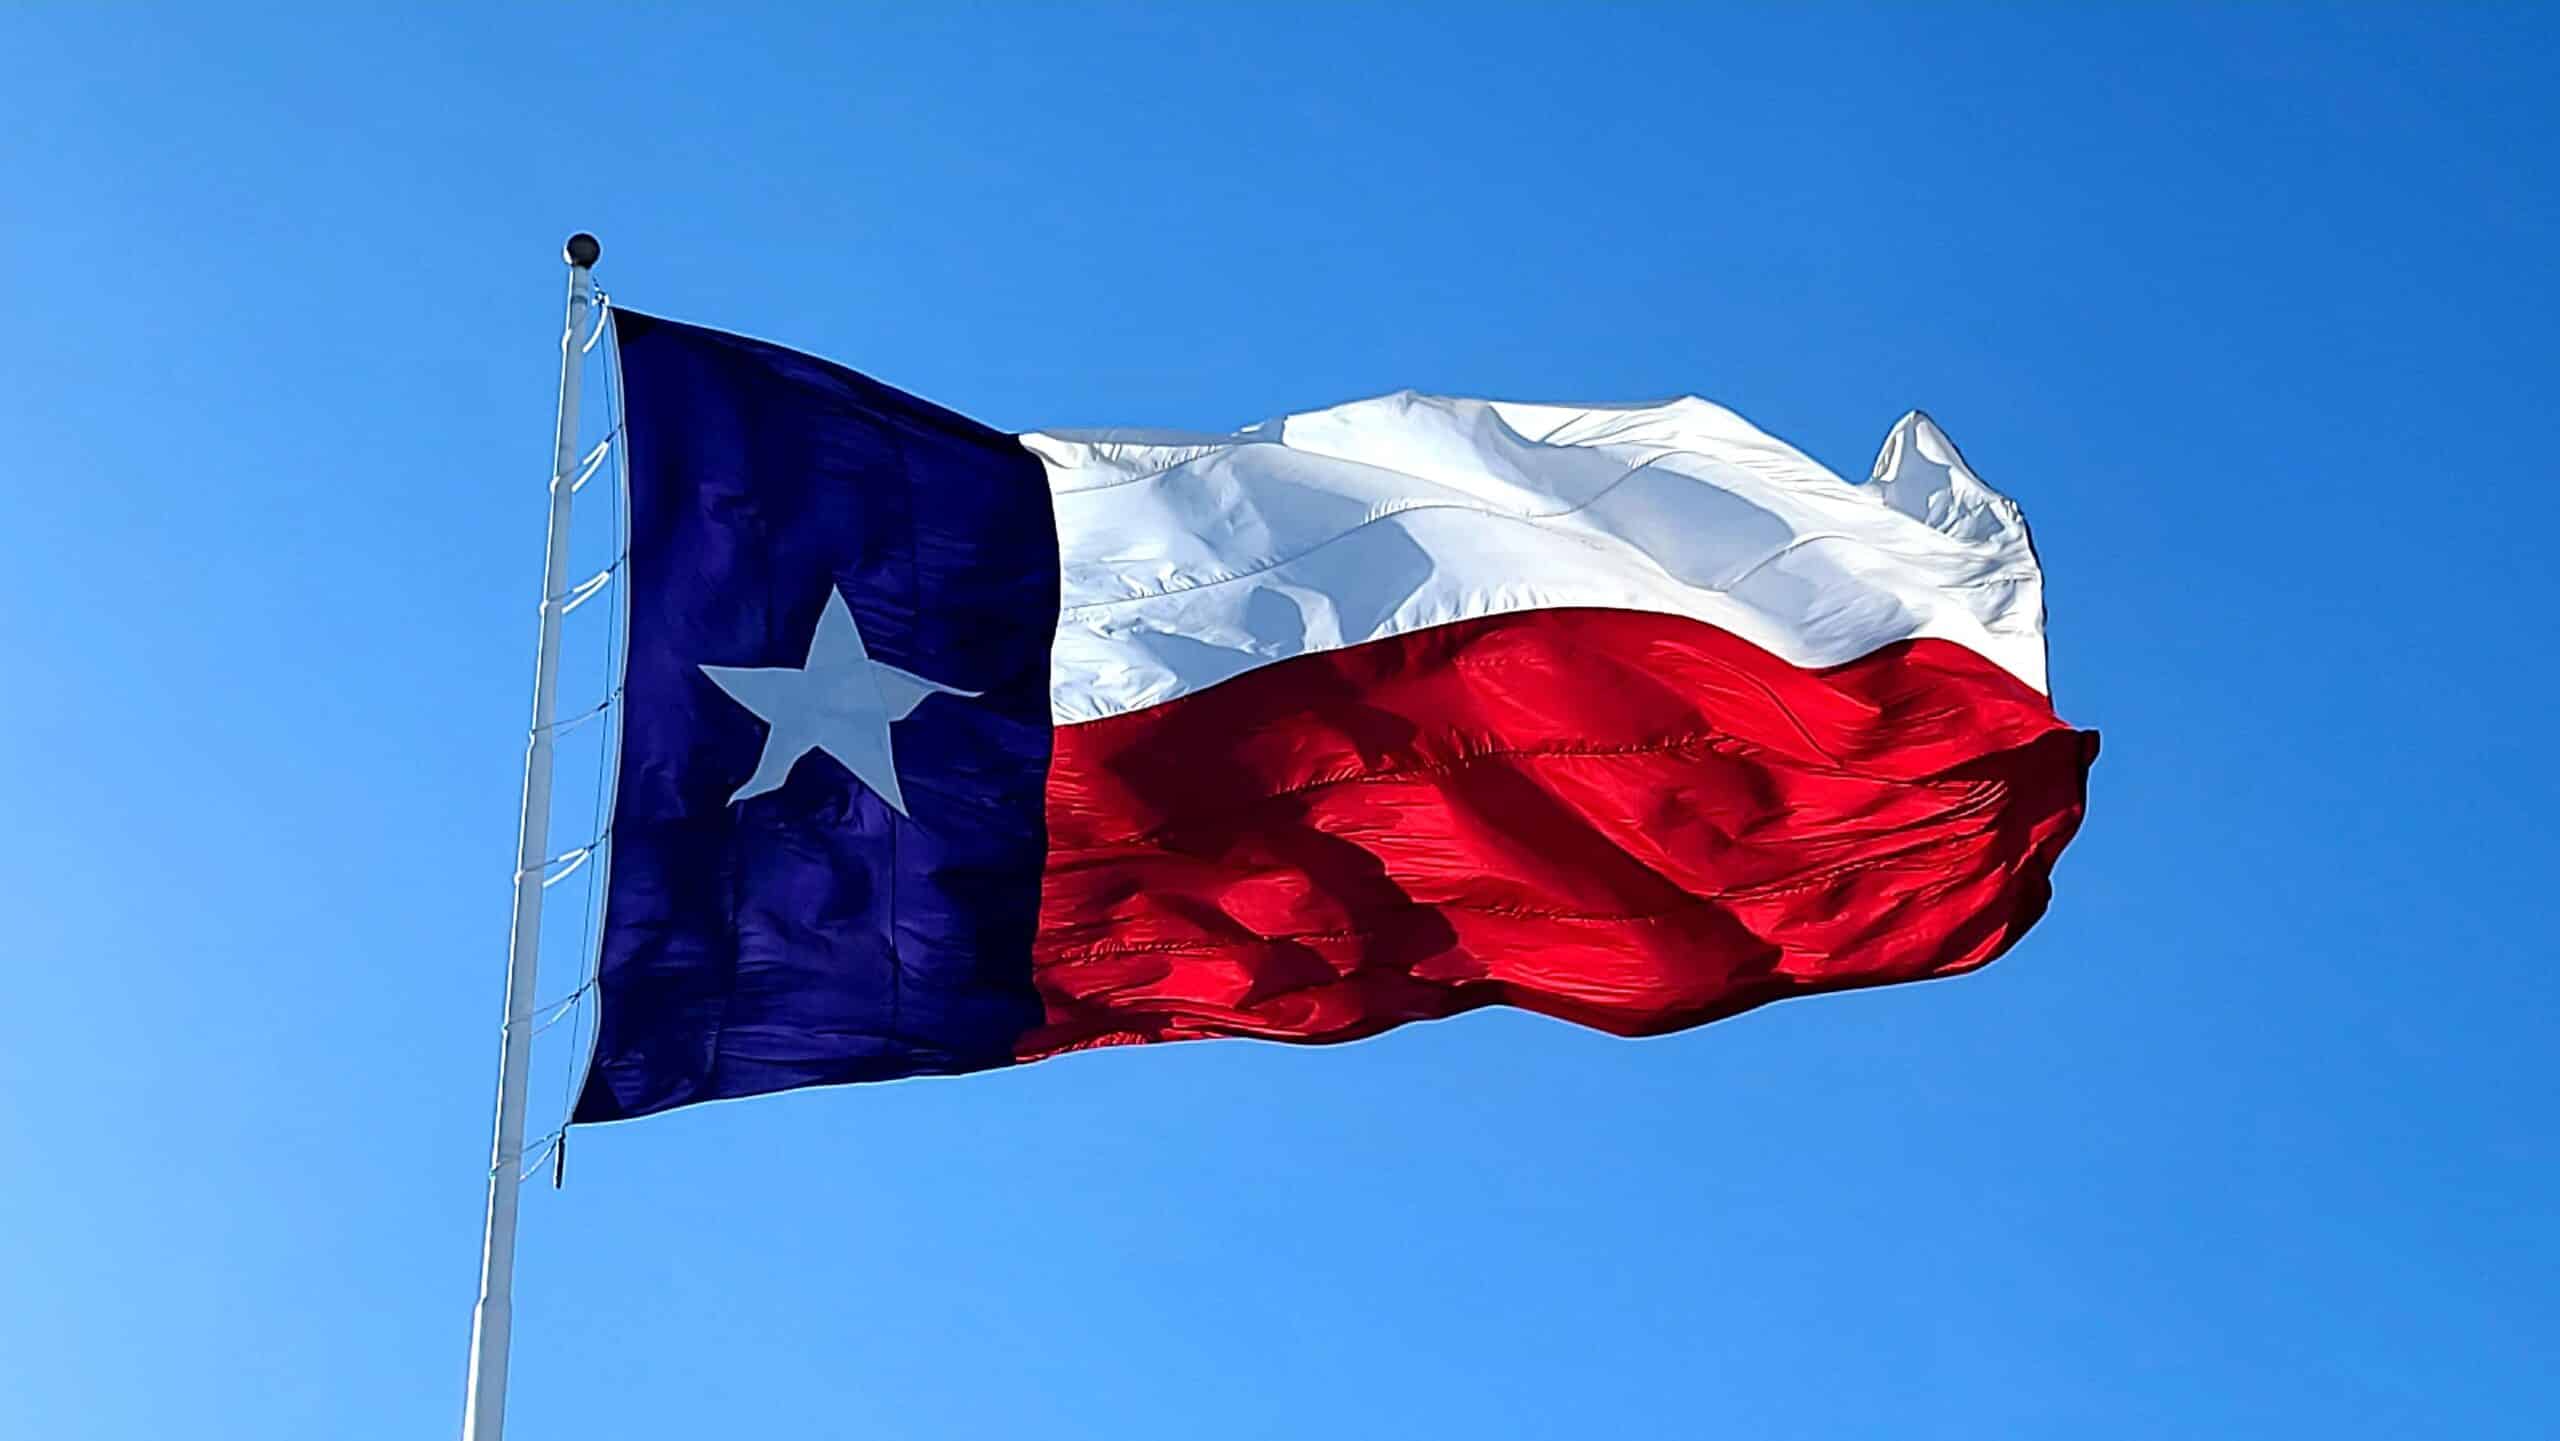 State of Texas flag, red blue and white with a star